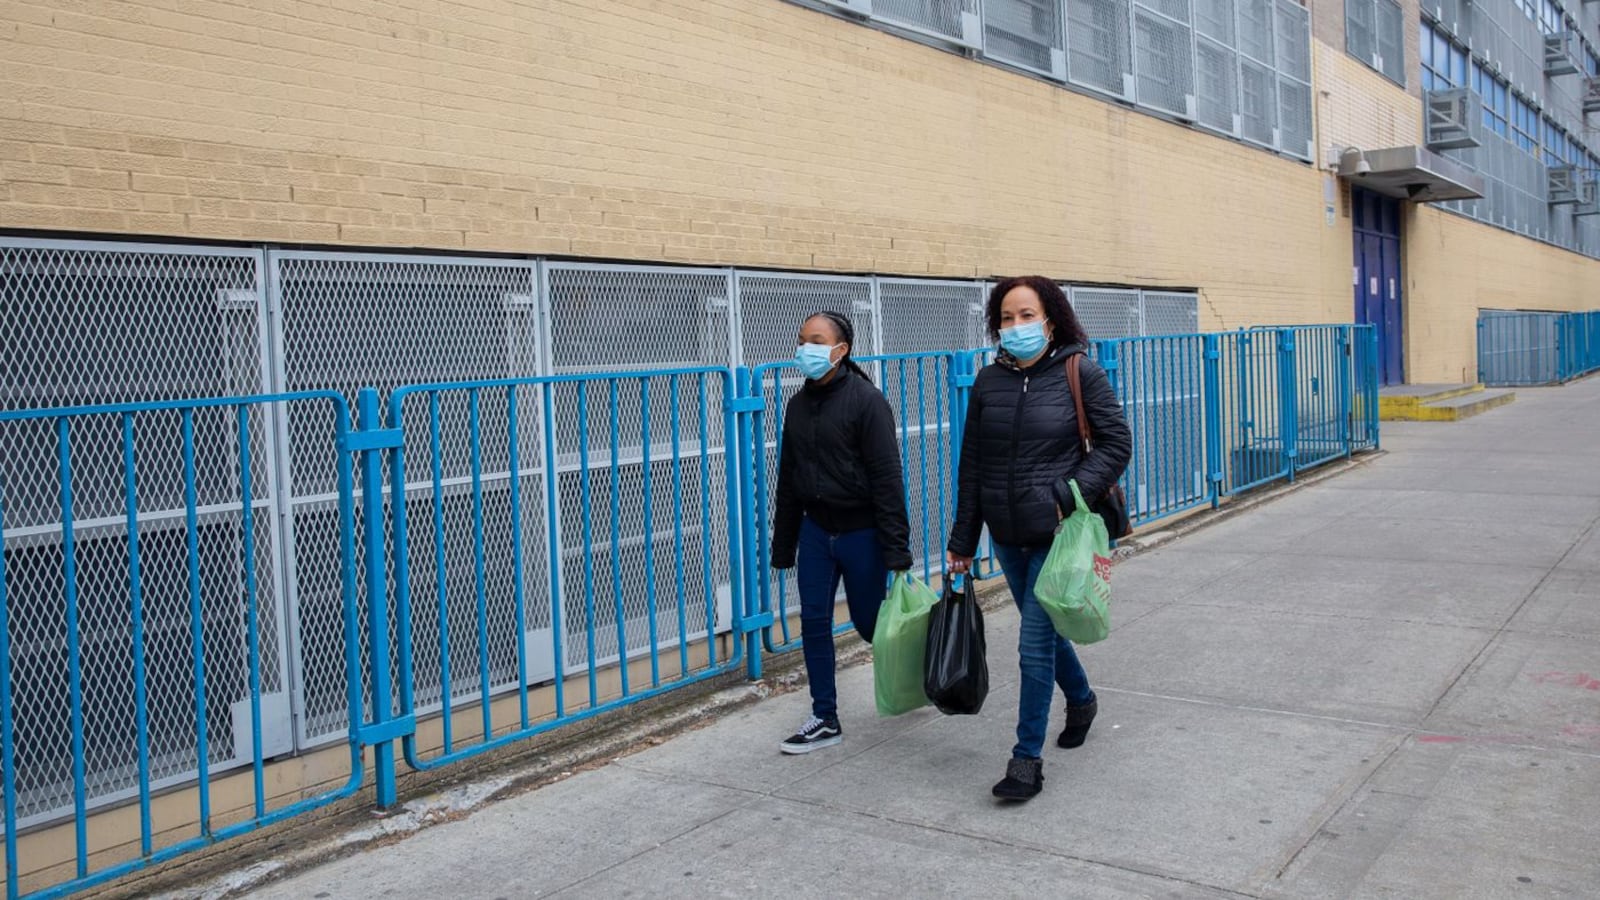 The Laboratory School of Finance and Technology and South Bronx Preparatory in Mott Haven was closed in March after a student tested positive for the coronavirus.